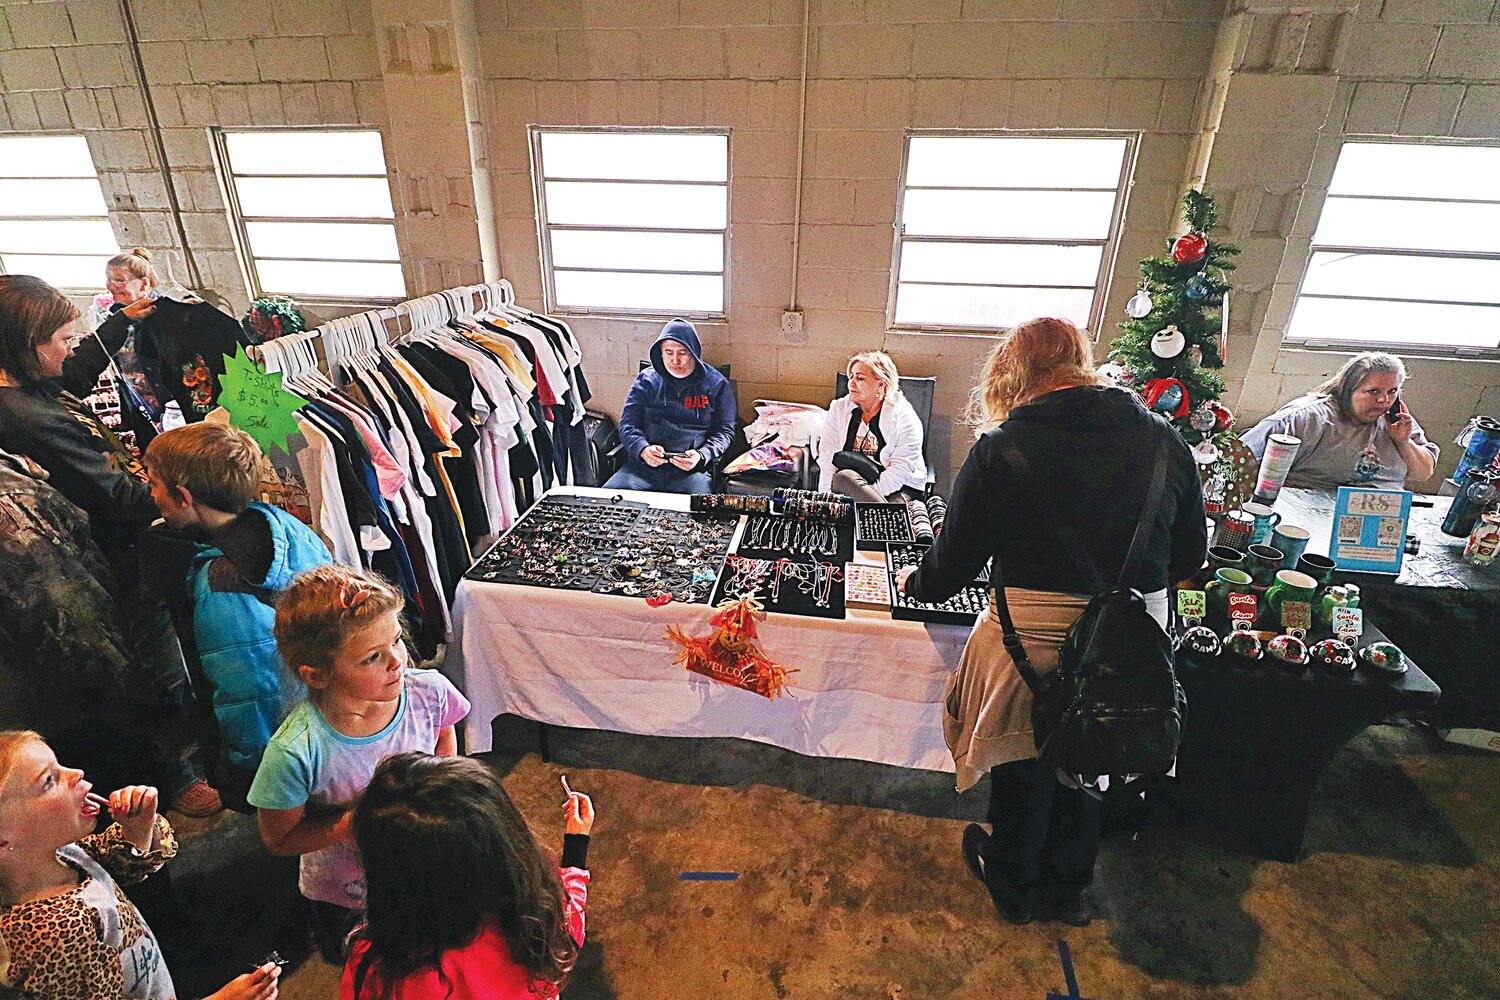 More than 30 vendors filled the Basham Building for Holiday Market.